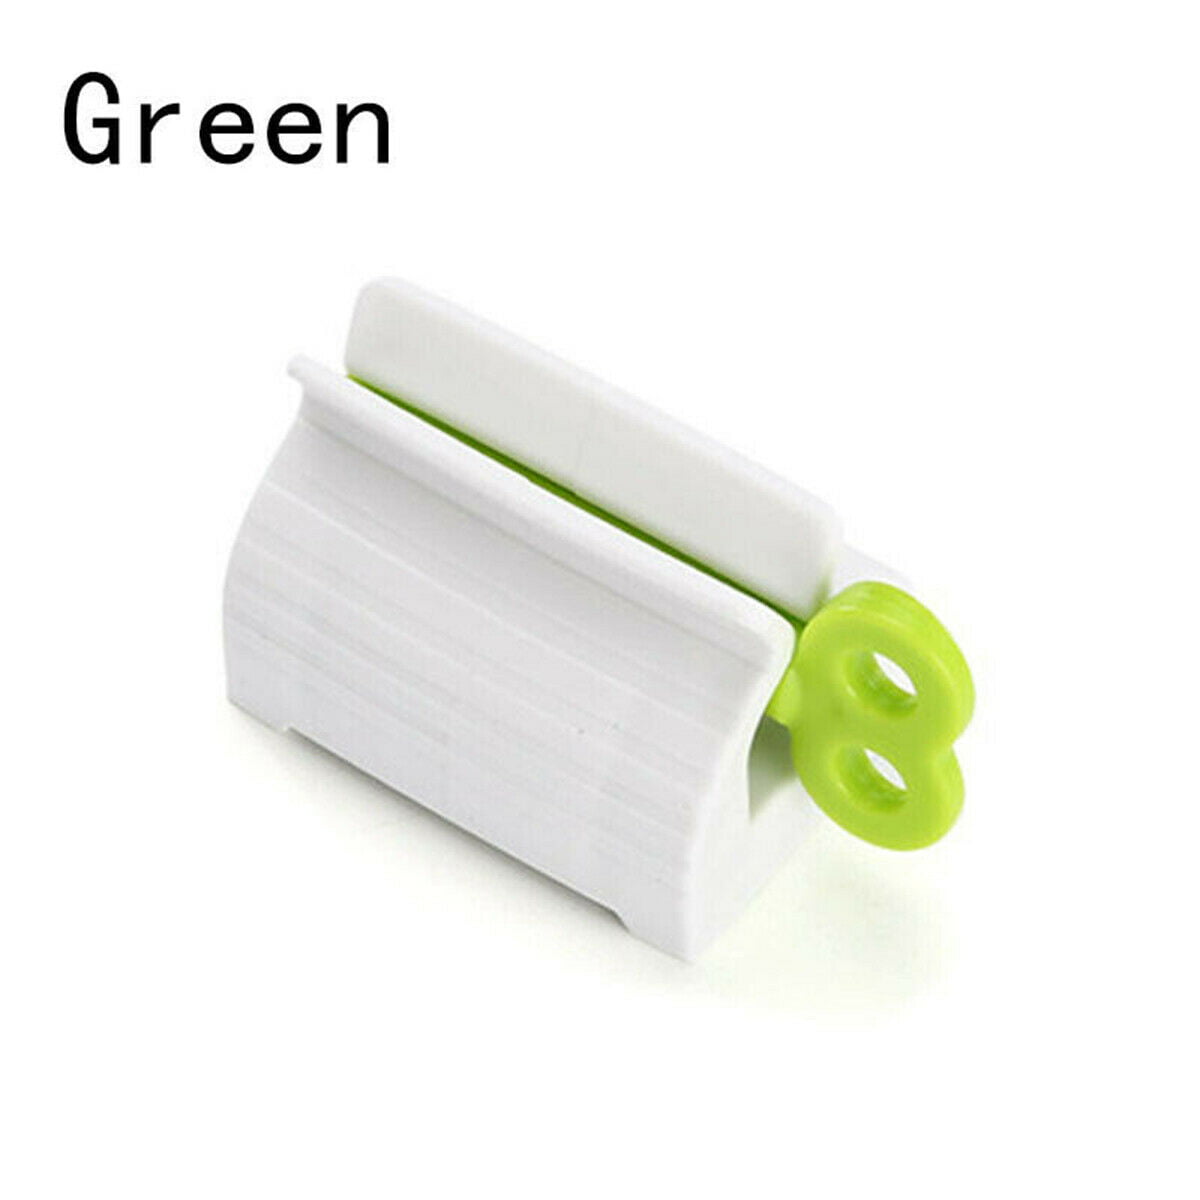 Details about   3Color Toothpaste Squeezer Rolling Tube Dispenser Toothpaste Seat Holder Stand 